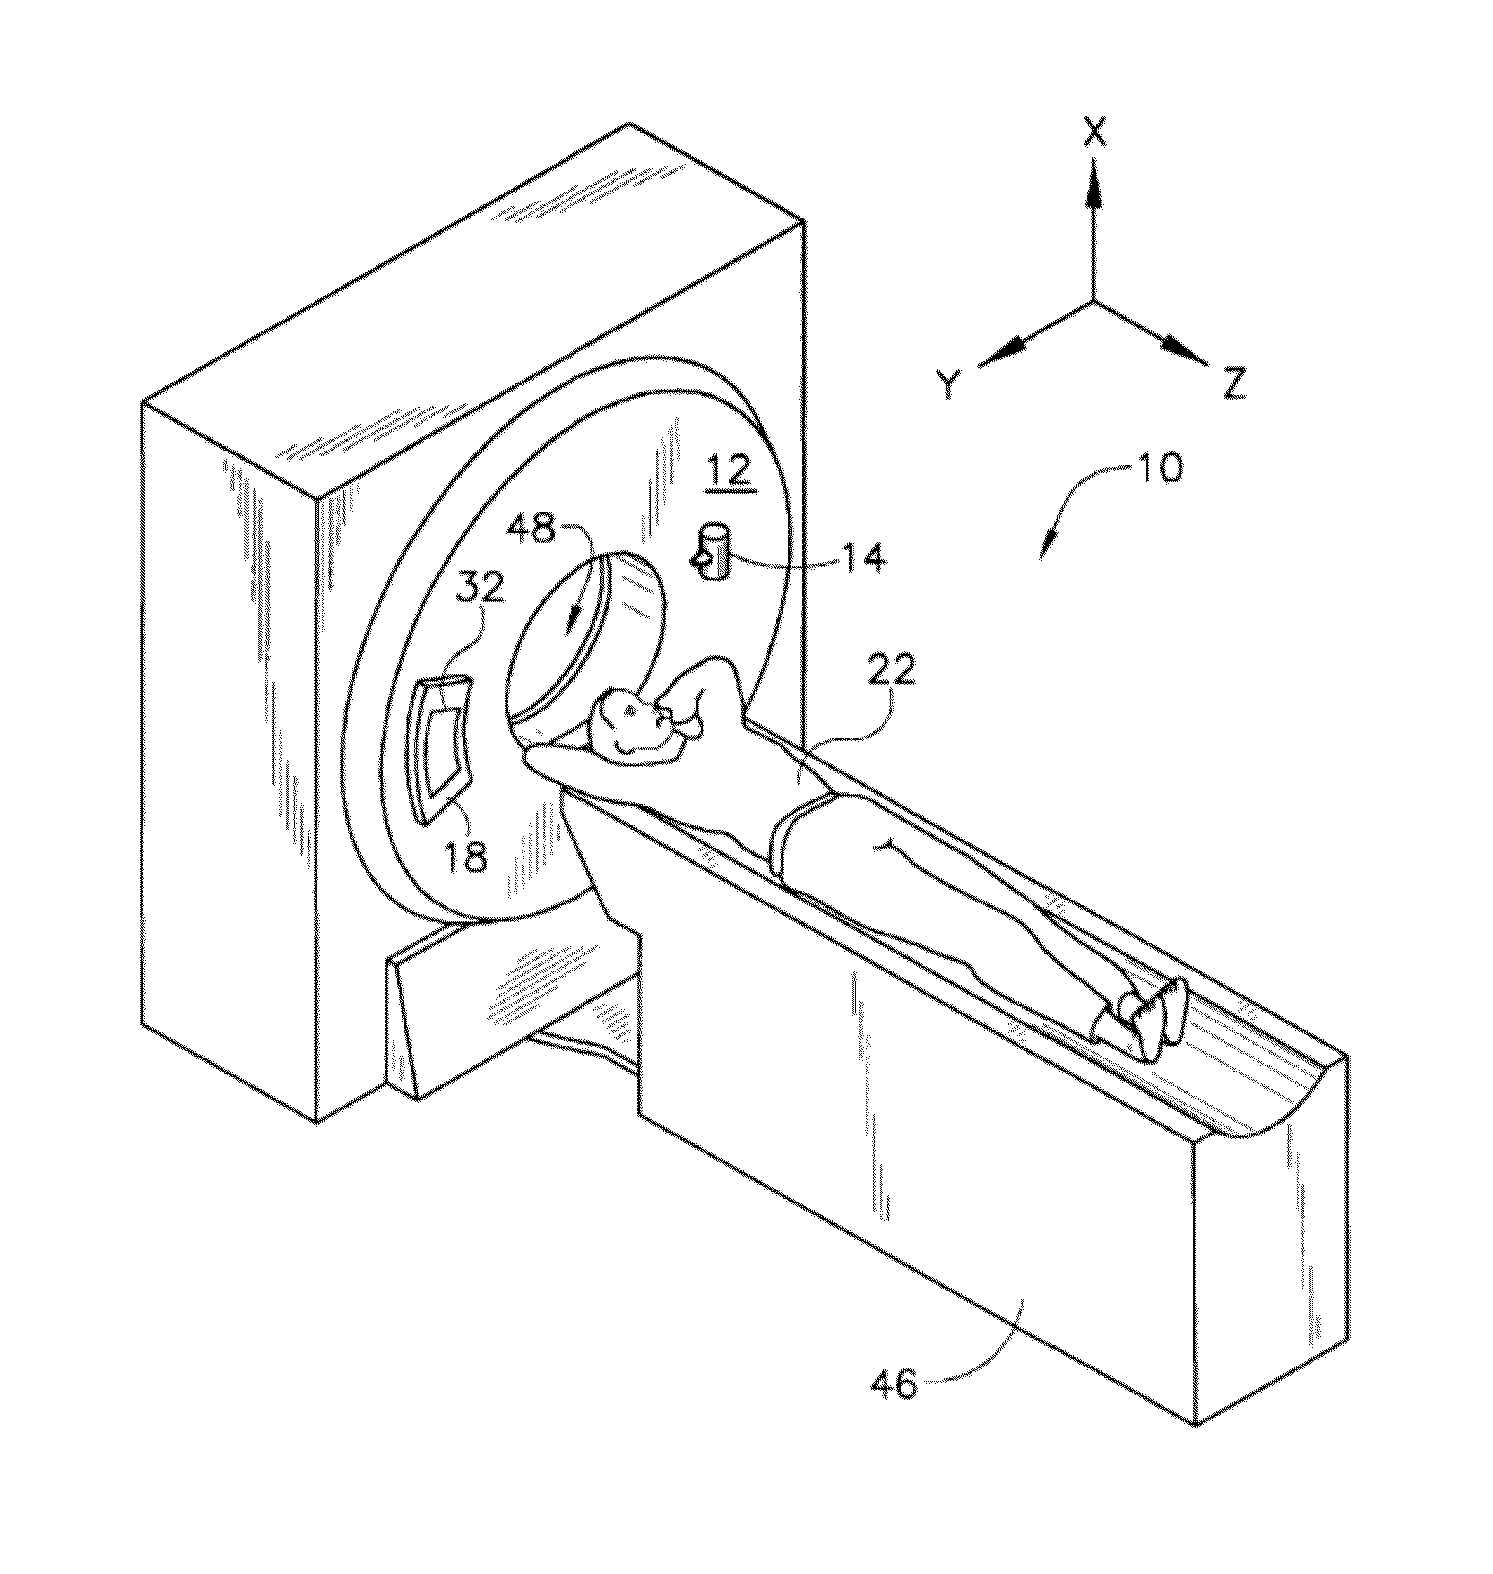 Method and apparatus for reducing artifacts in computed tomography image reconstruction